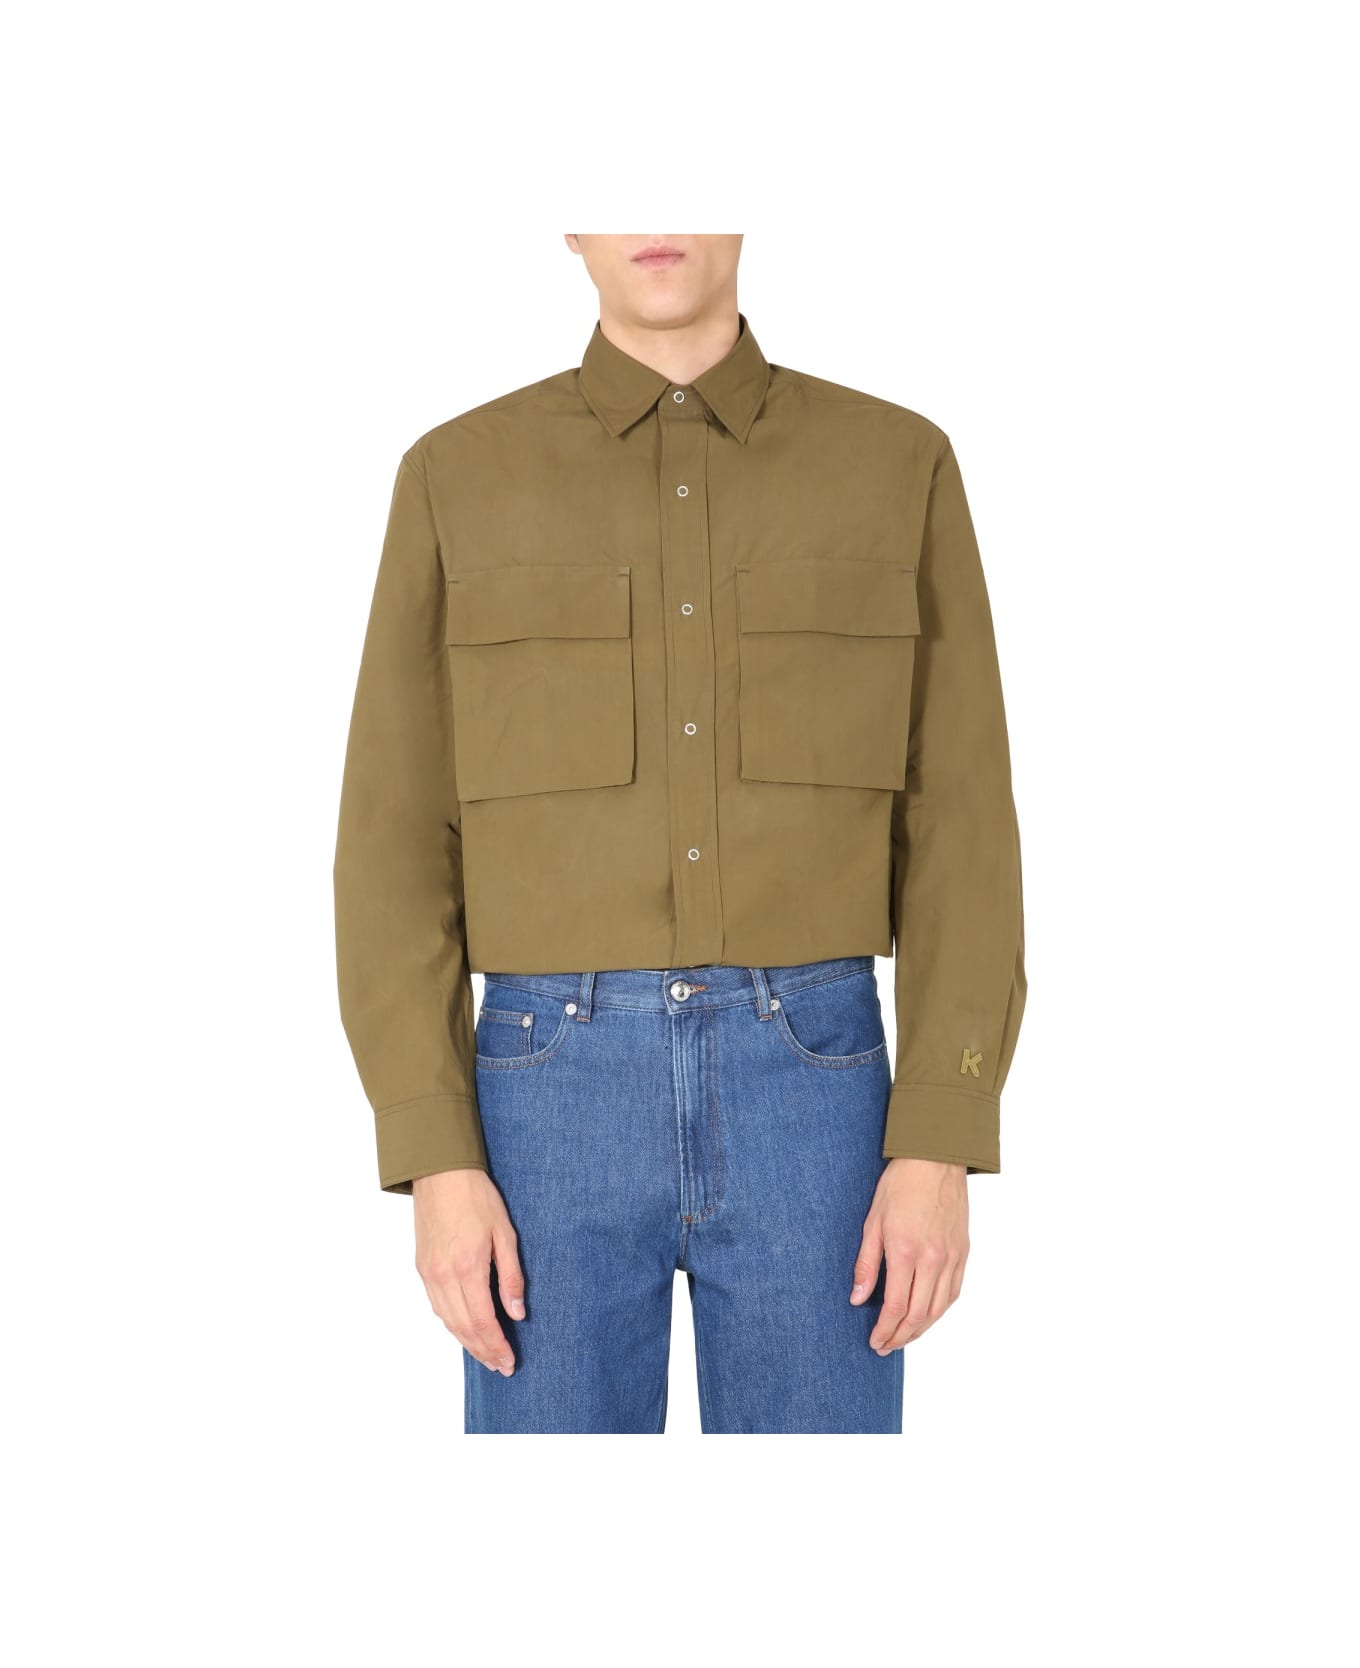 Kenzo Oversize Fit Shirt - BROWN シャツ